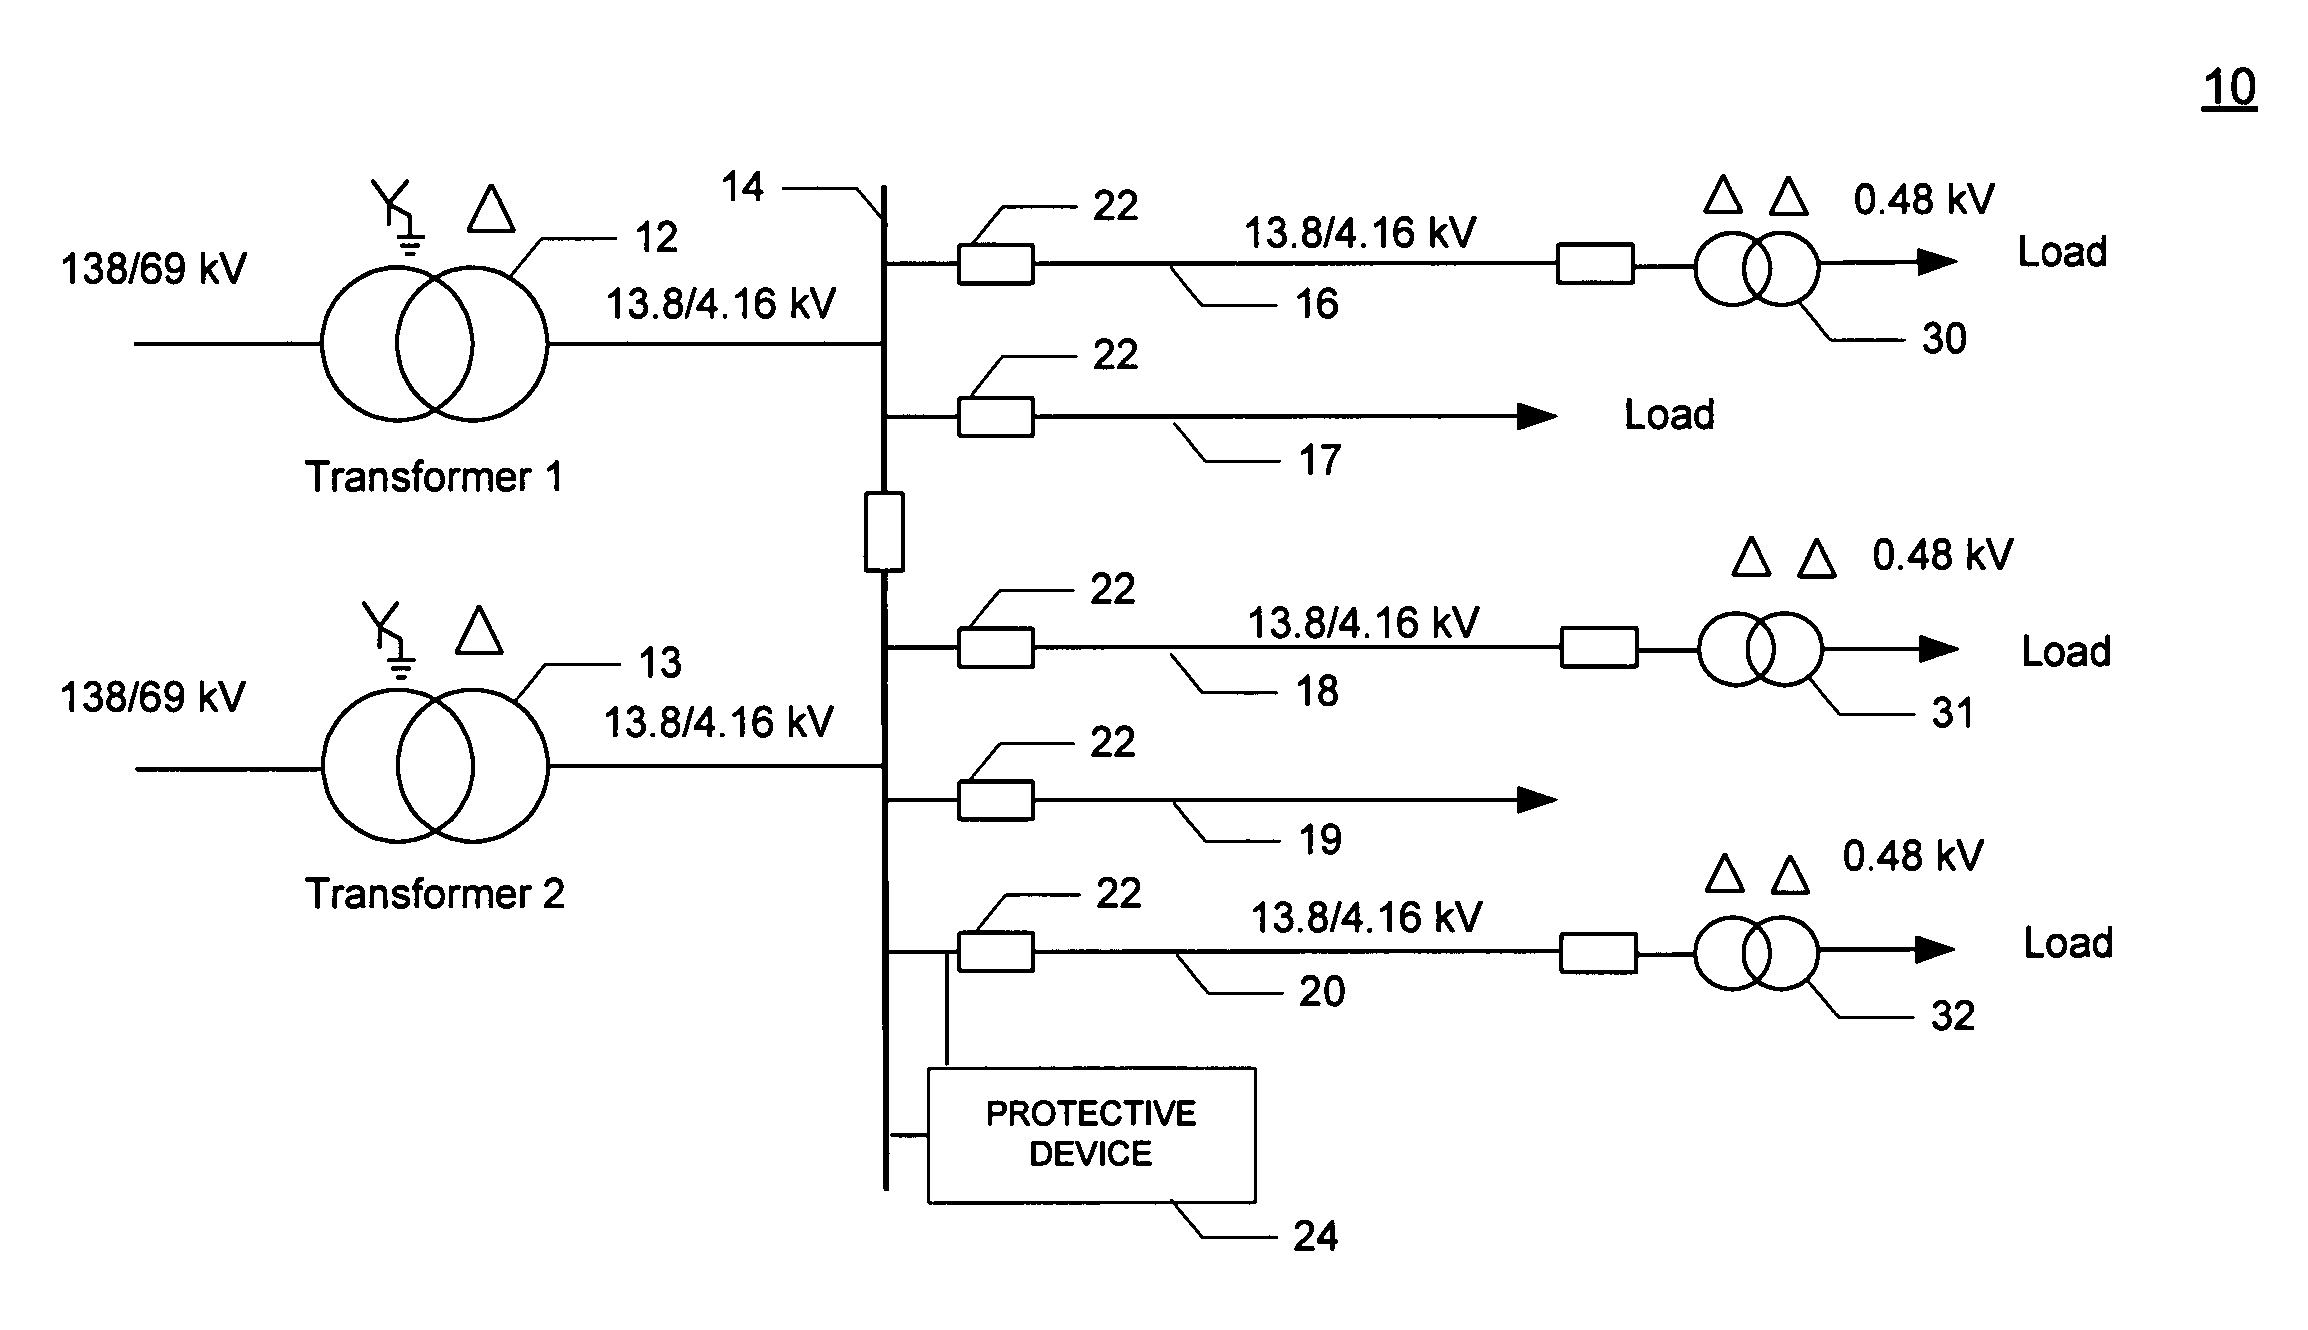 Apparatus and method for determining a faulted phase of a three-phase ungrounded power system